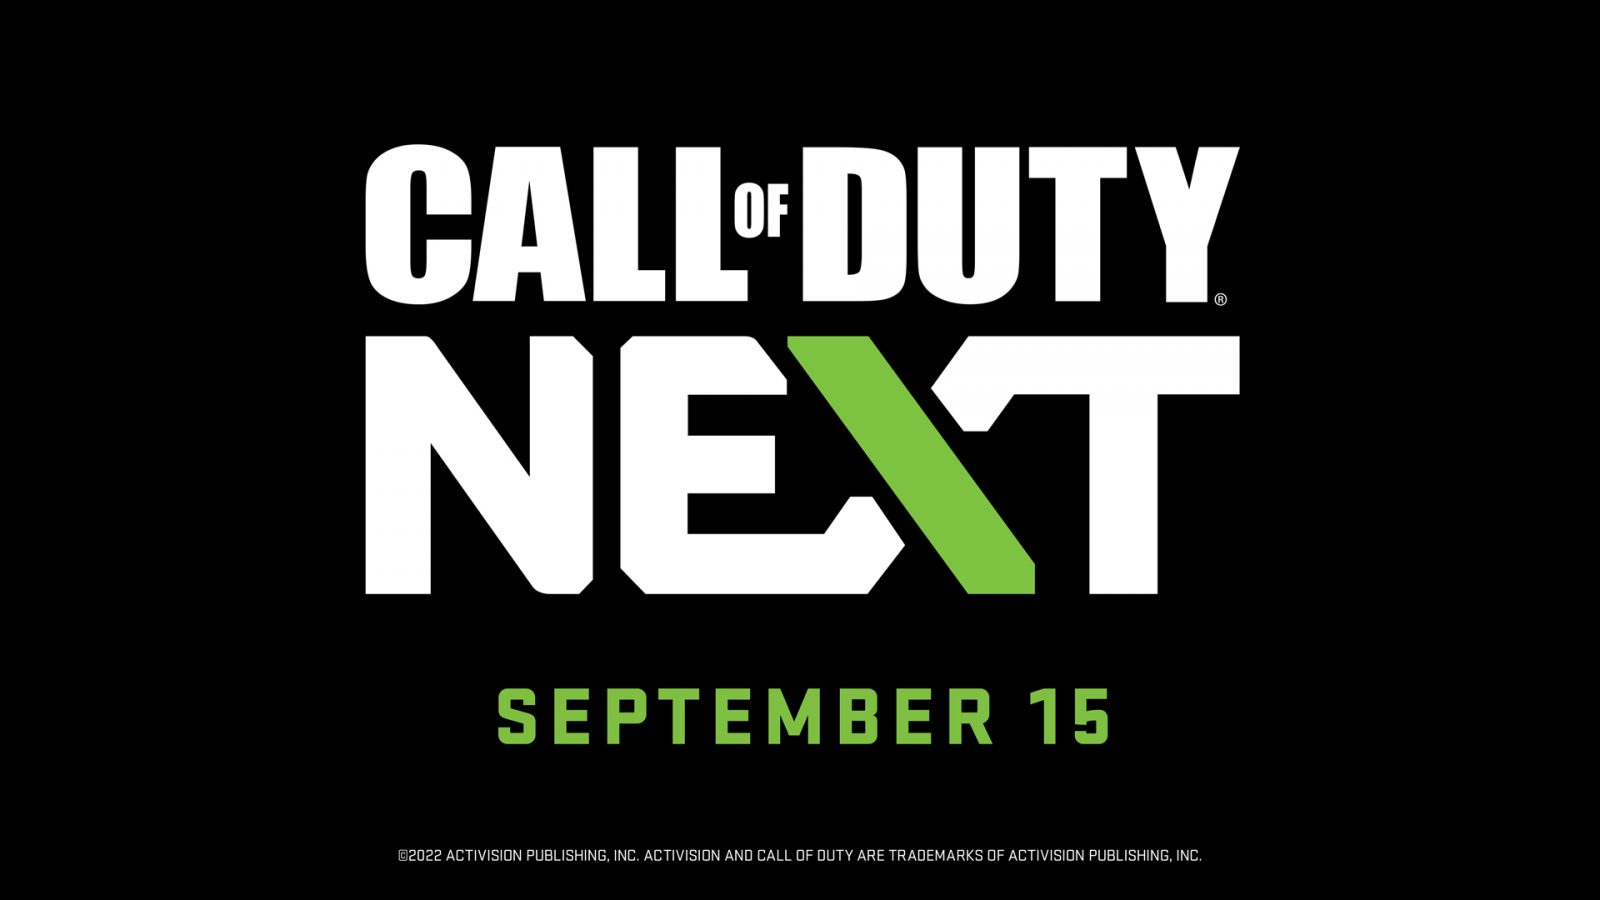 Full intel on Call of Duty: Modern Warfare II and Warzone Season 05, out  August 2 – PlayStation.Blog